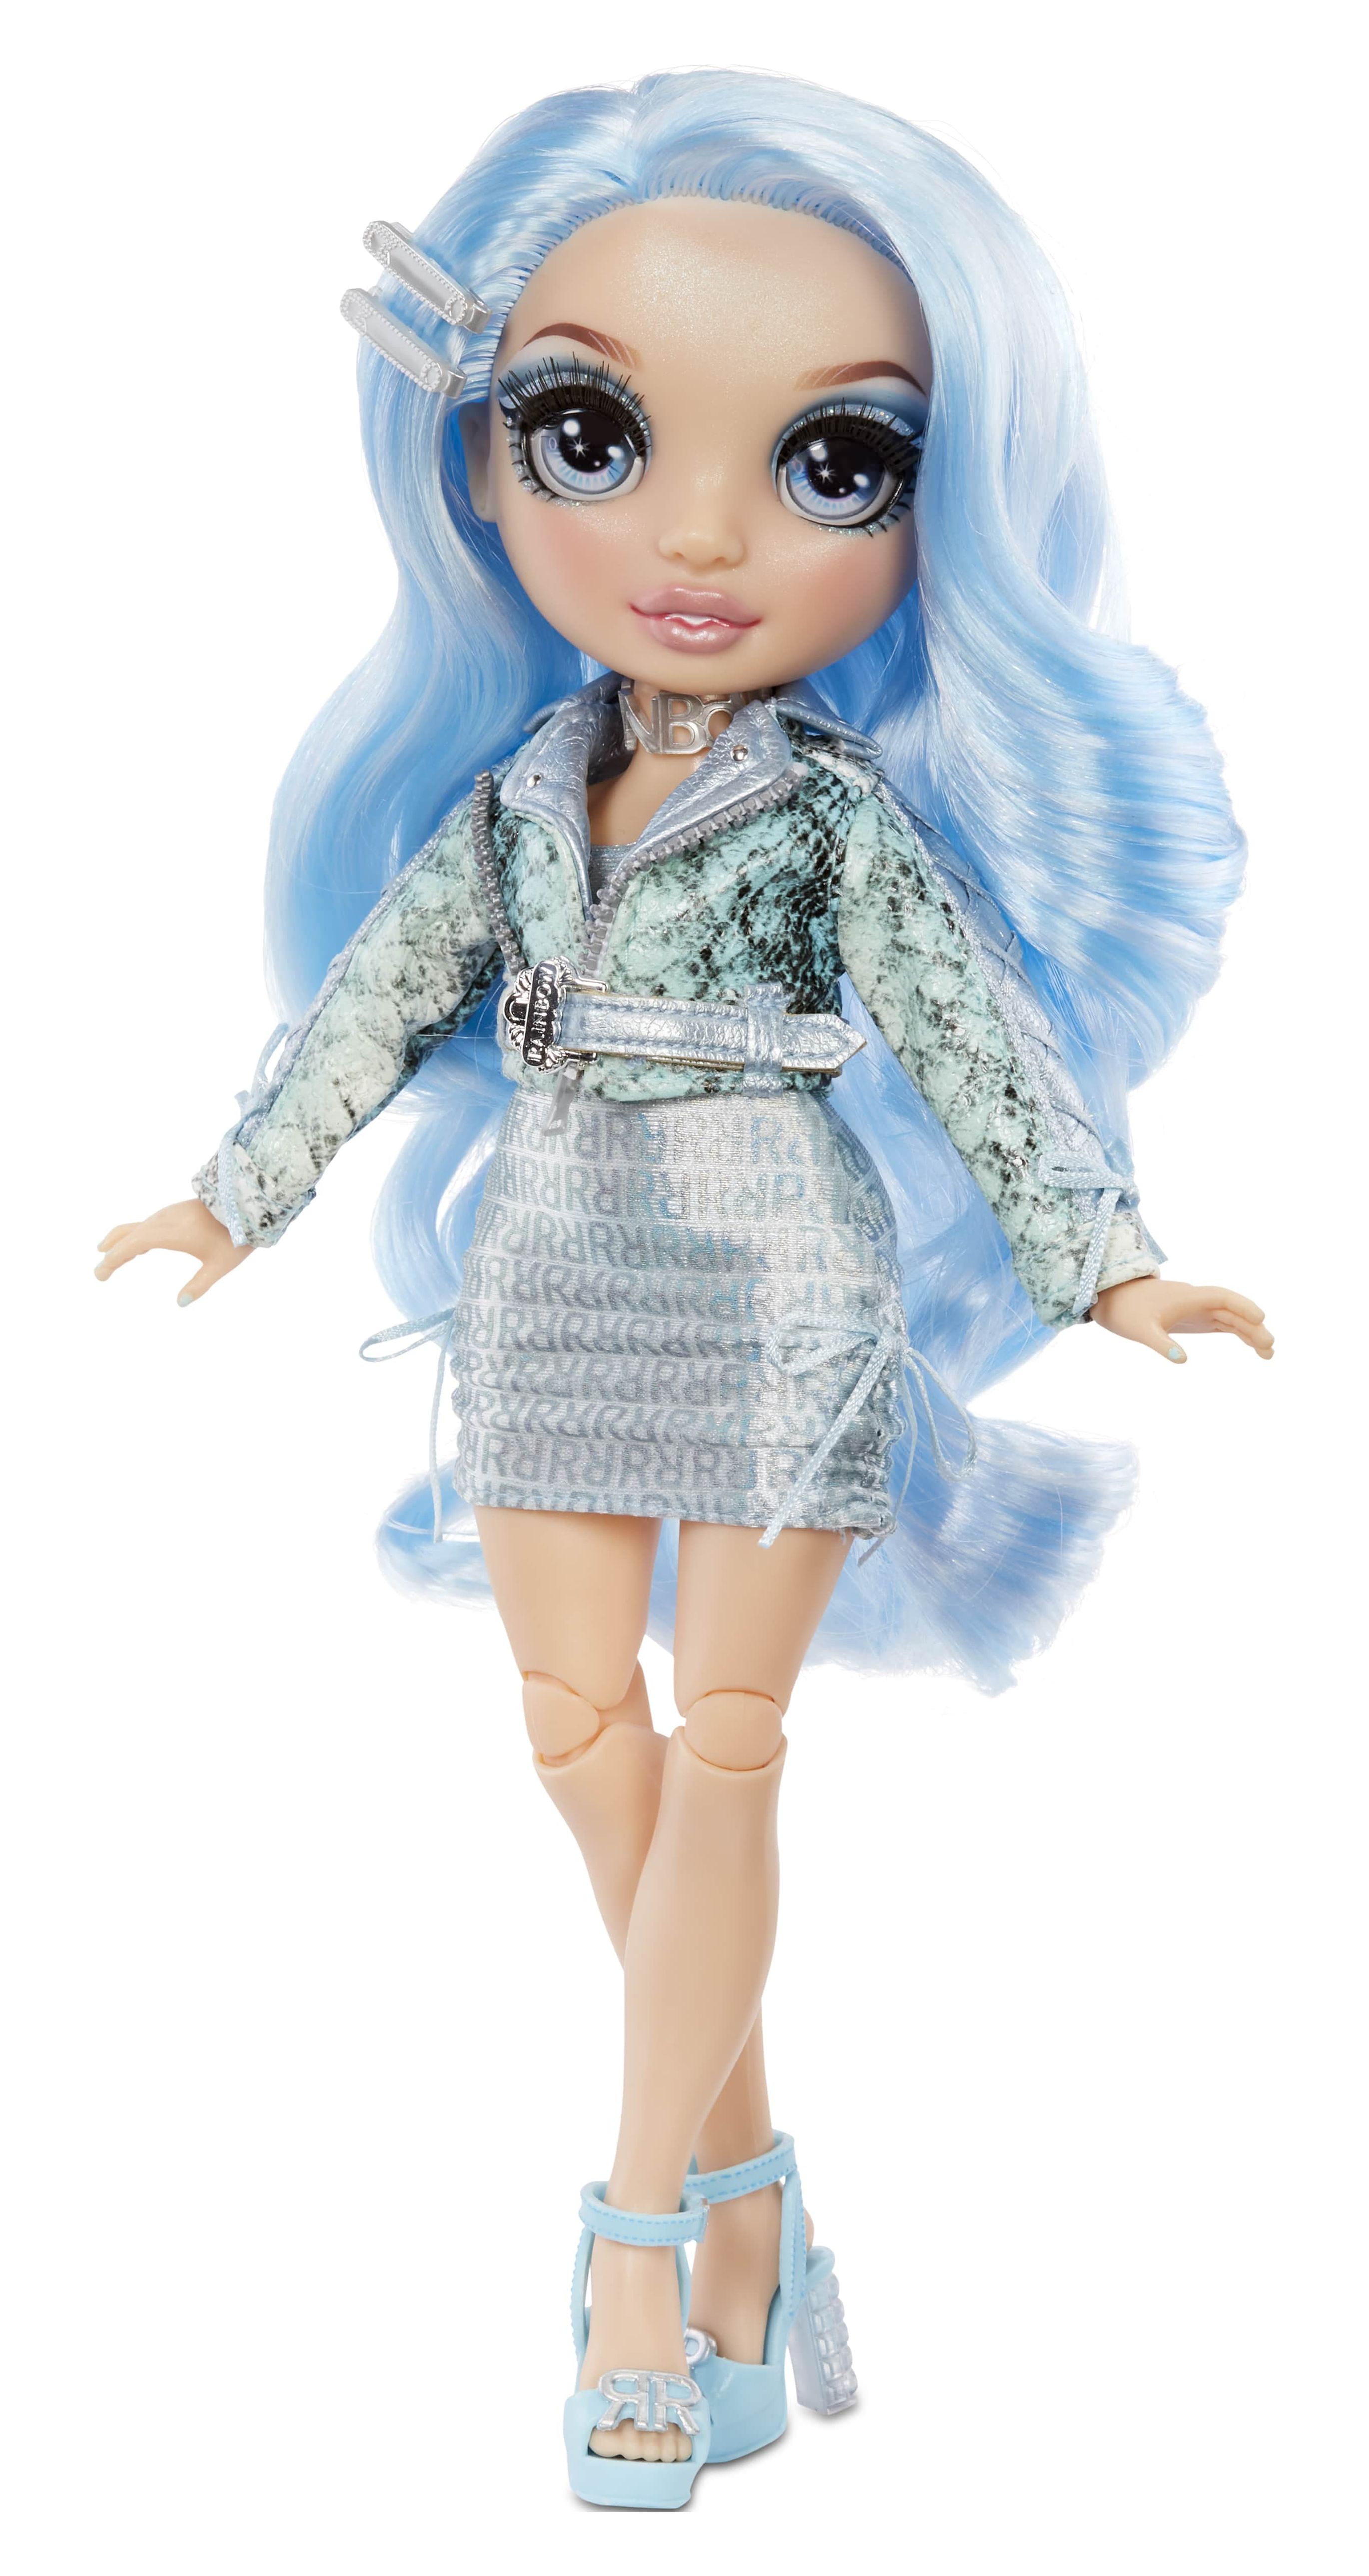 Rainbow High Gabriella Icely Light Blue Doll Playset, 12 Pieces - image 1 of 6